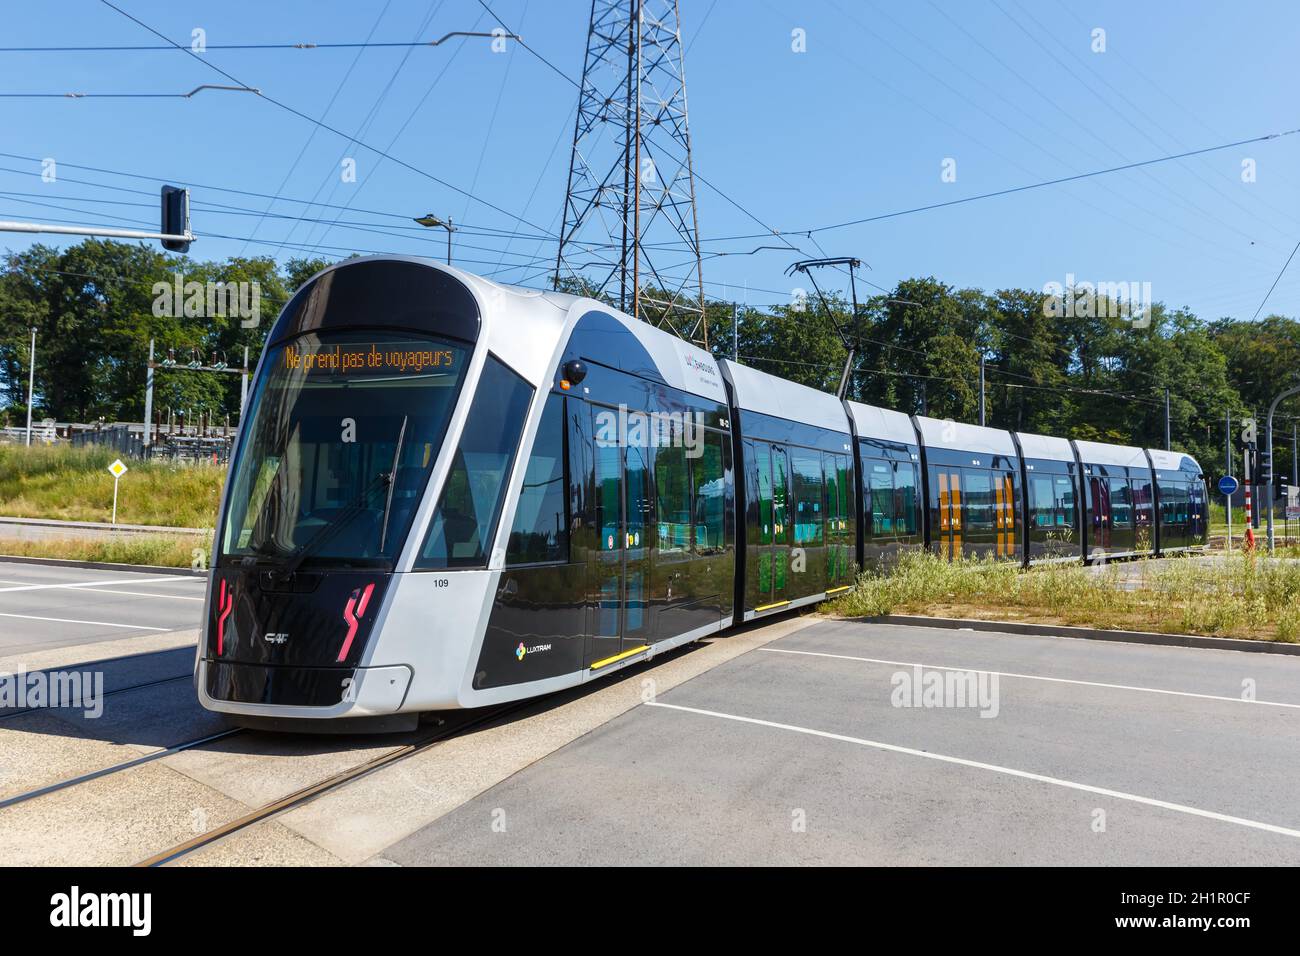 Luxembourg - June 24, 2020: Tram Luxtram train transit transport CAF Urbos in Luxembourg. Stock Photo